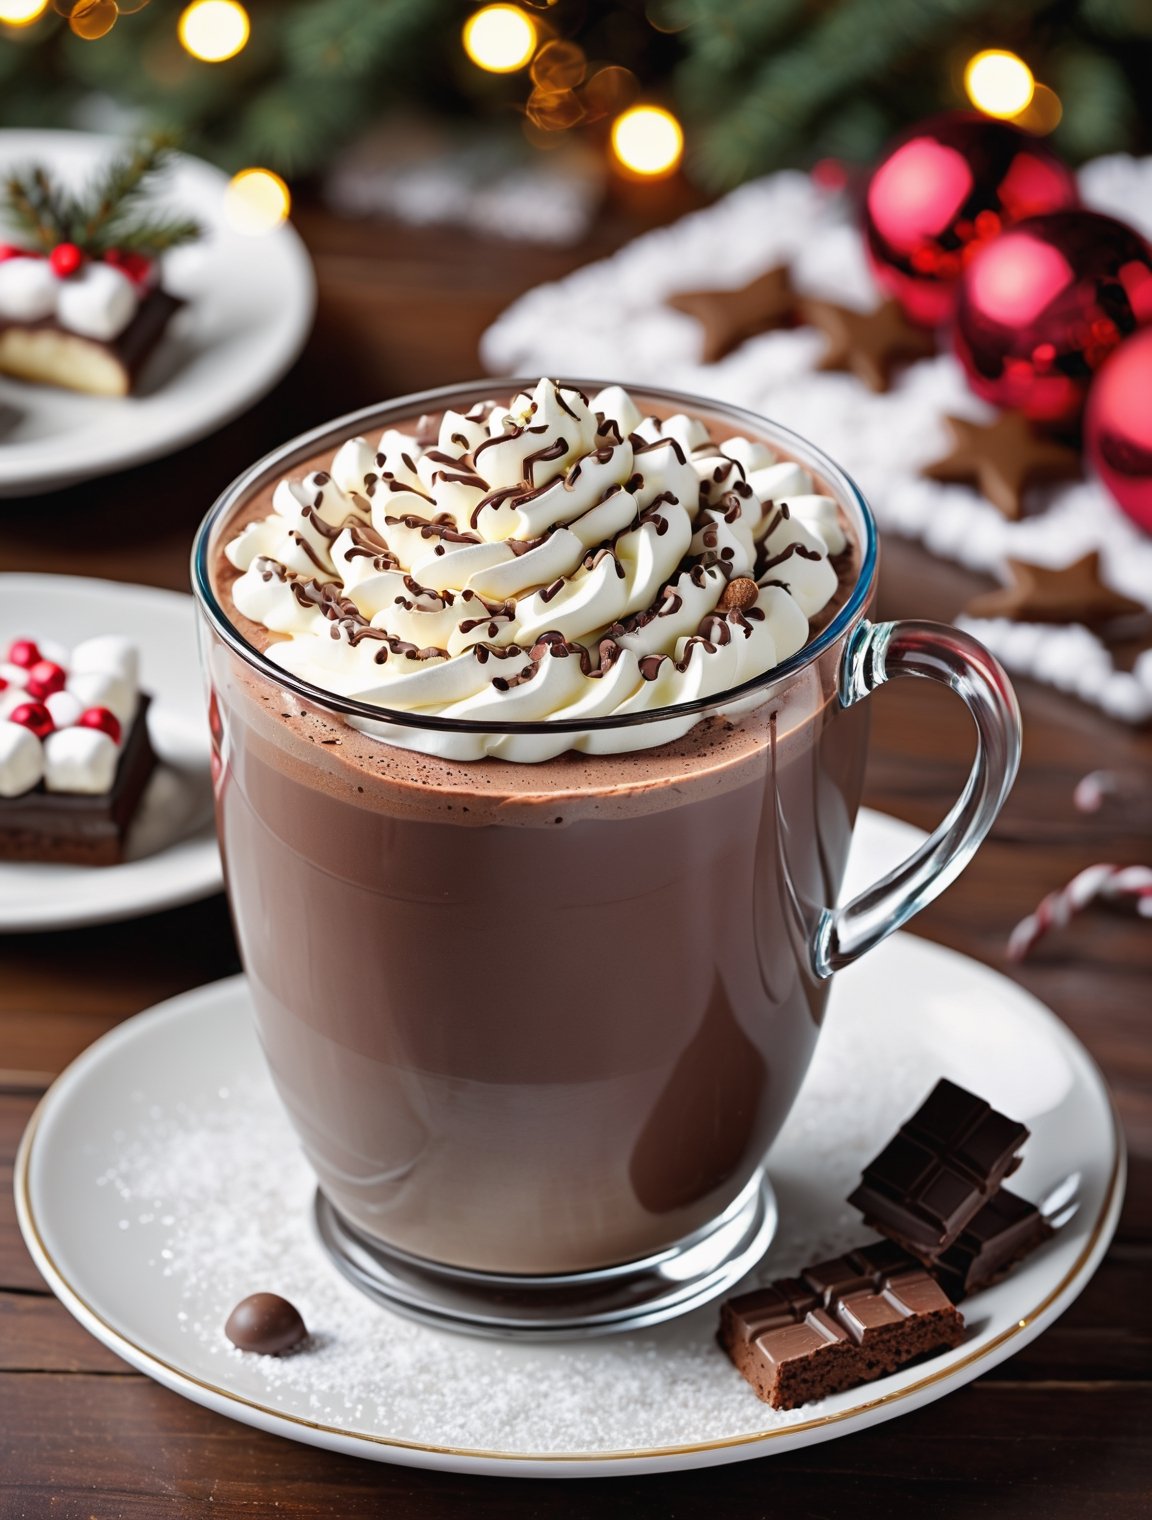 ((anime)), delicious dessert and a glass cup of hot chocolate, Christmas setting, dynamic angle, depth of field, detail XL,